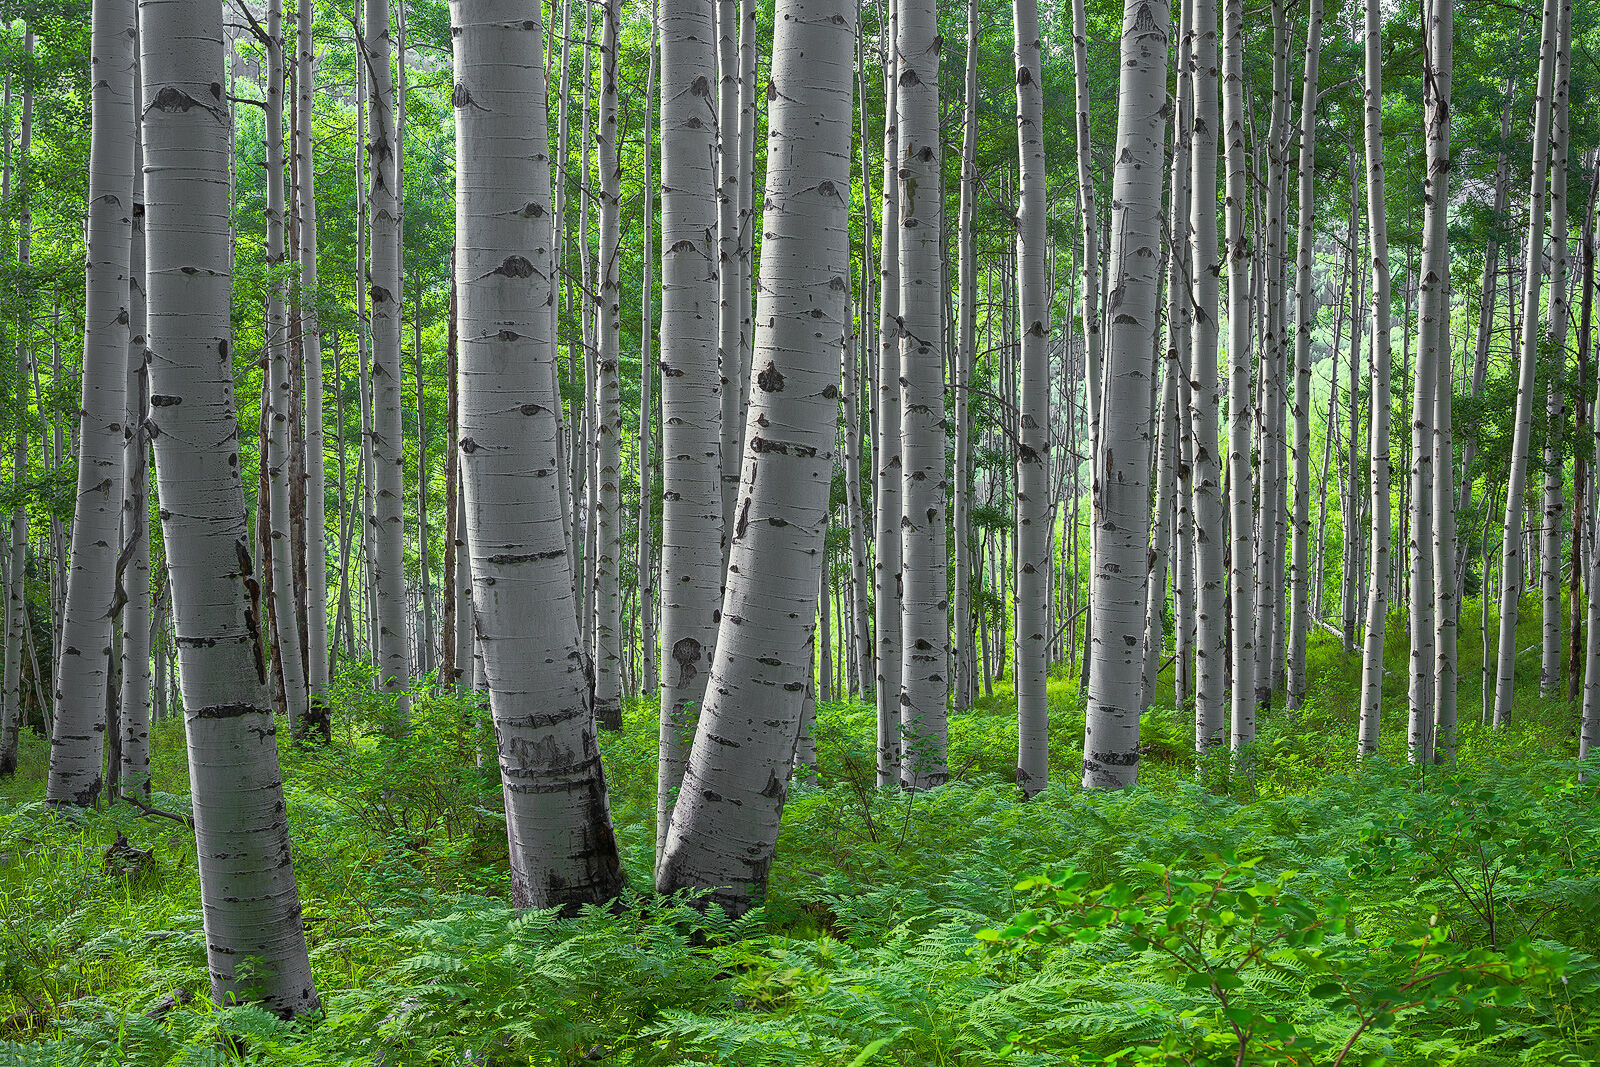 White aspen tree trunks are seen up close as green ferns cover the forest floor and green aspen leaves are seen at the tops of the trees in the background. 